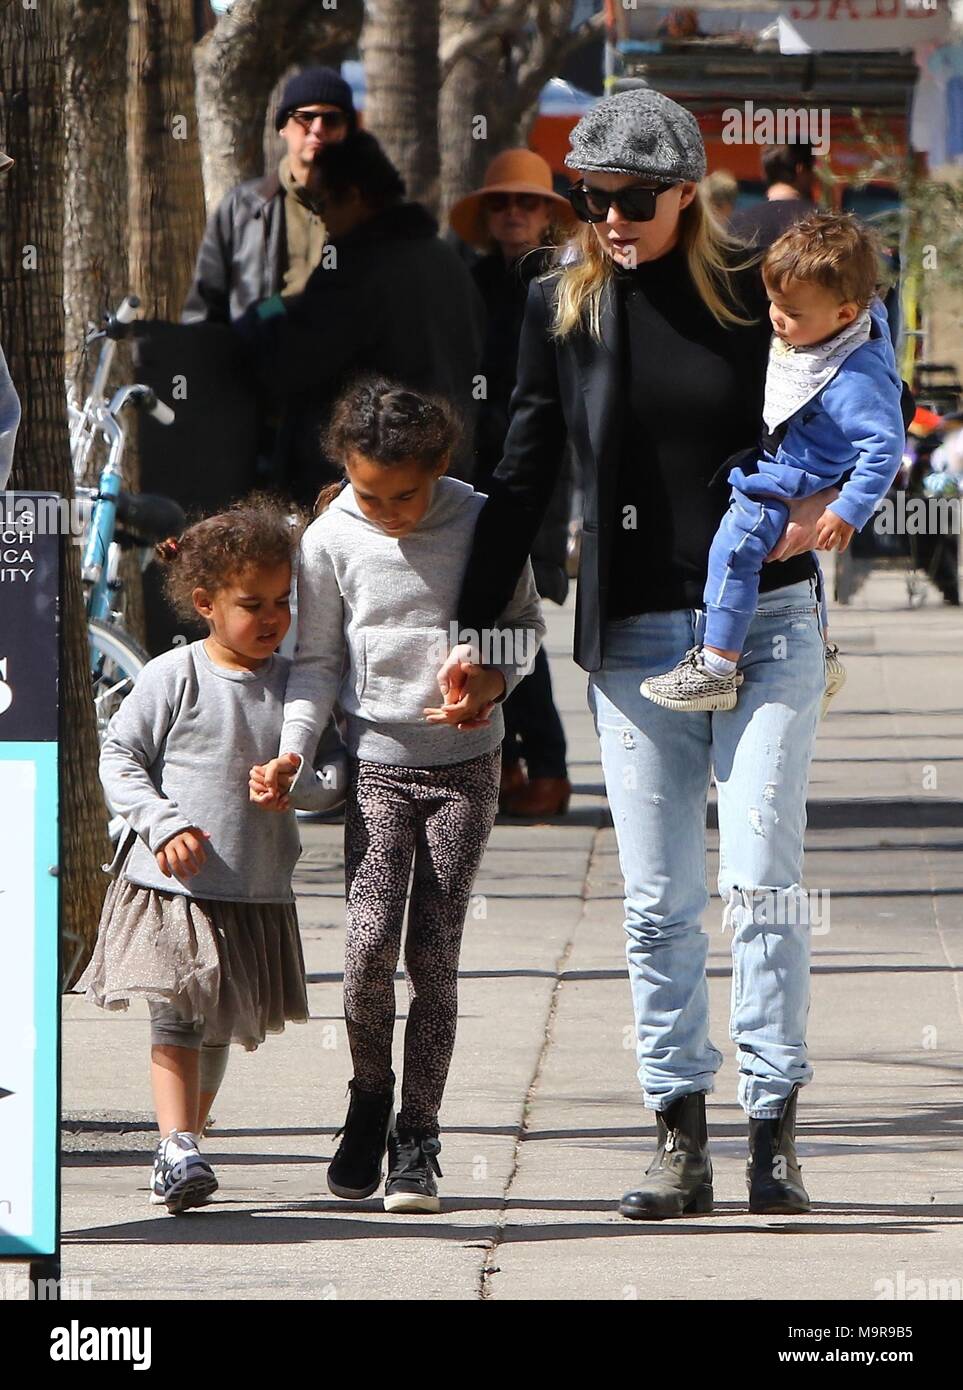 Ellen Pompeo leaving Joan's on Third with her children in Studio City  Featuring: Ellen Pompeo, Stella Ivery, Sienna Ivery, Eli Ivery Where:  Studio City, California, United States When: 24 Feb 2018 Credit: